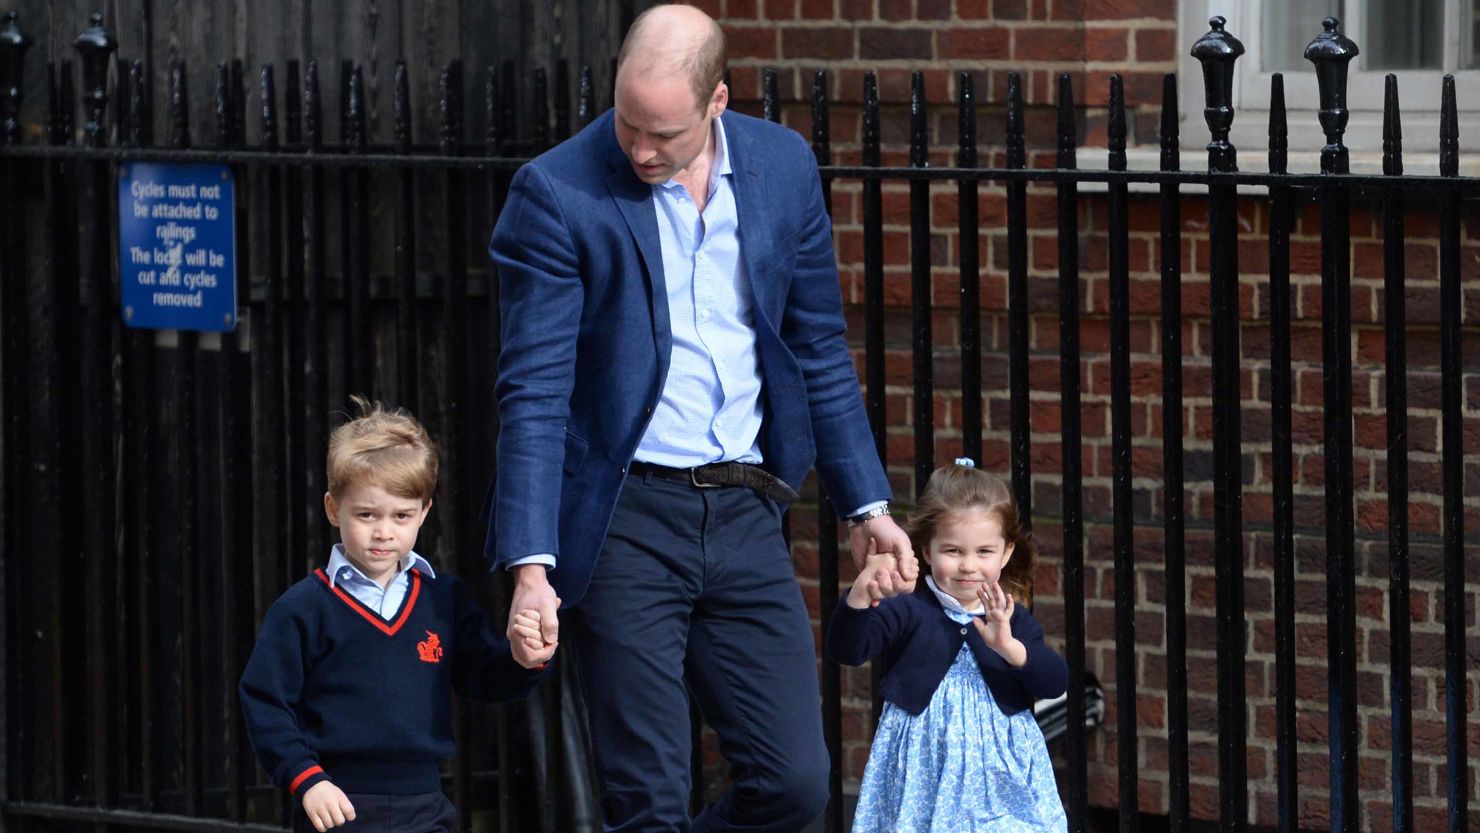 Prince George and Princess Charlotte arrive at St. Mary's Hospital in London with their father, the Duke of Cambridge, to meet the newborn Prince Louis in April.